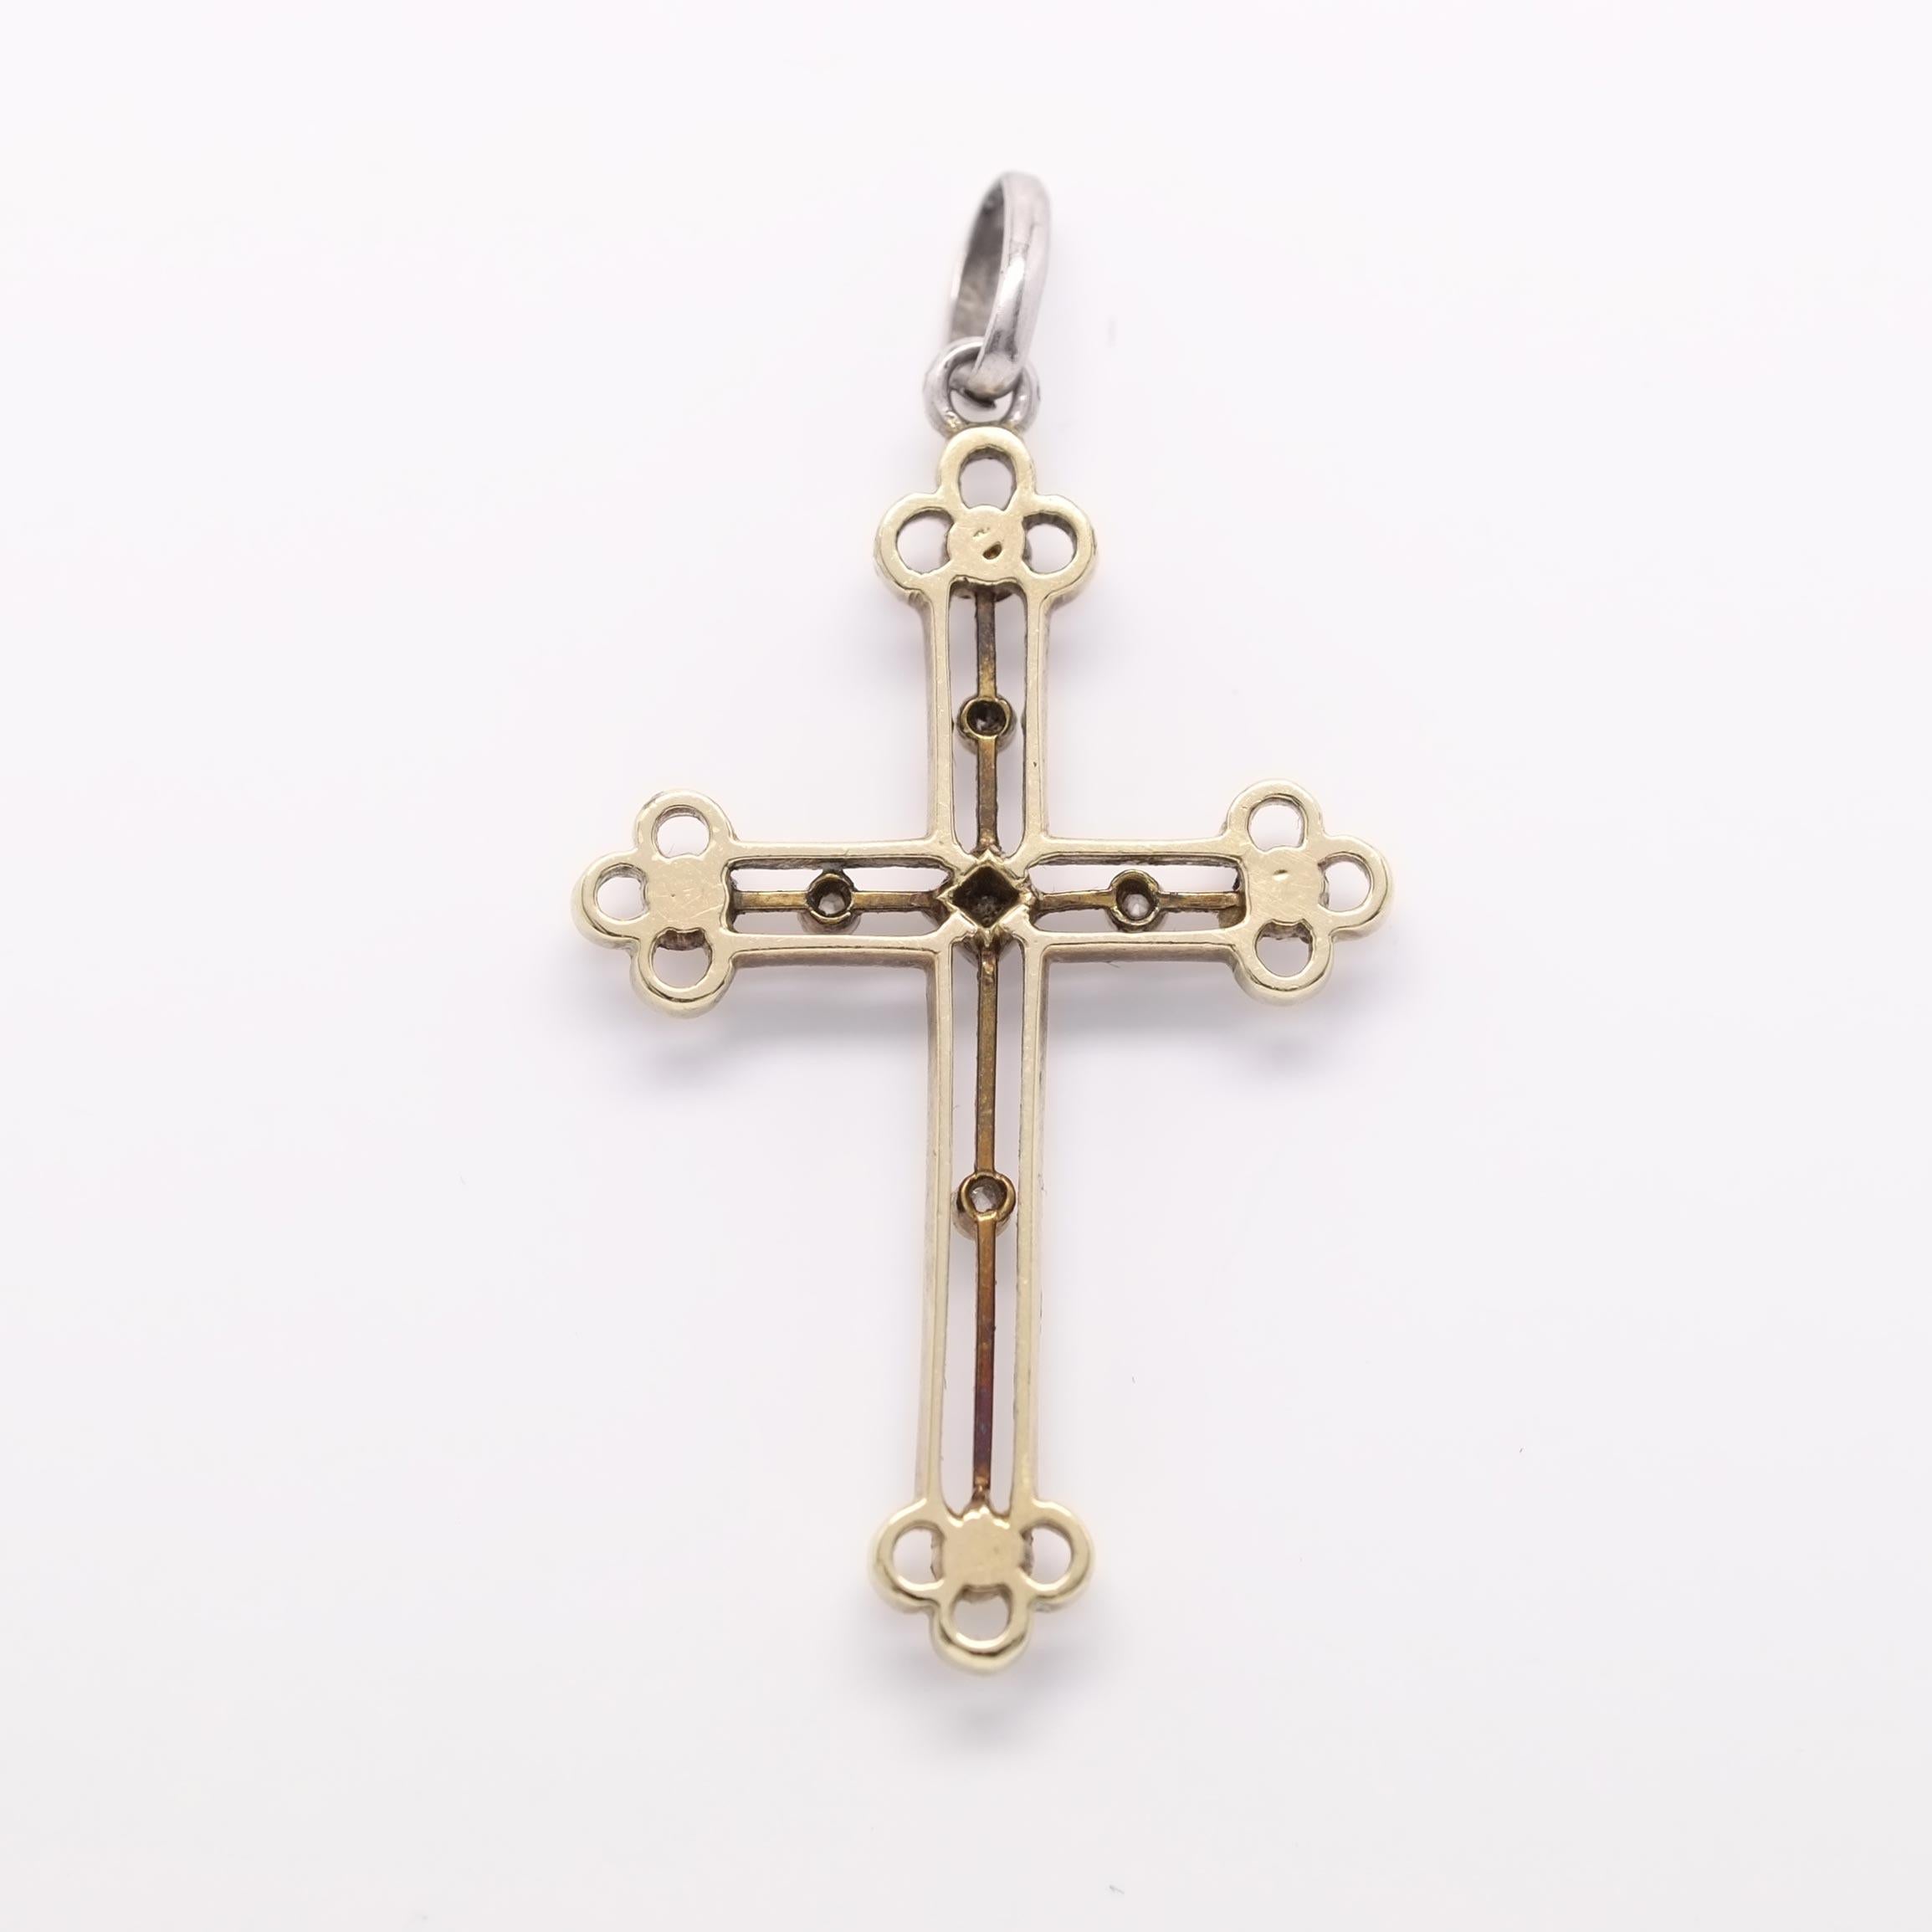 Cross pendant created at the beginning of the XX century. A goldsmithing masterpiece, it owes its beauty to the artistic skills of its creator. A particular sensitivity has been translated into a cross that at first glance is linear and discreet